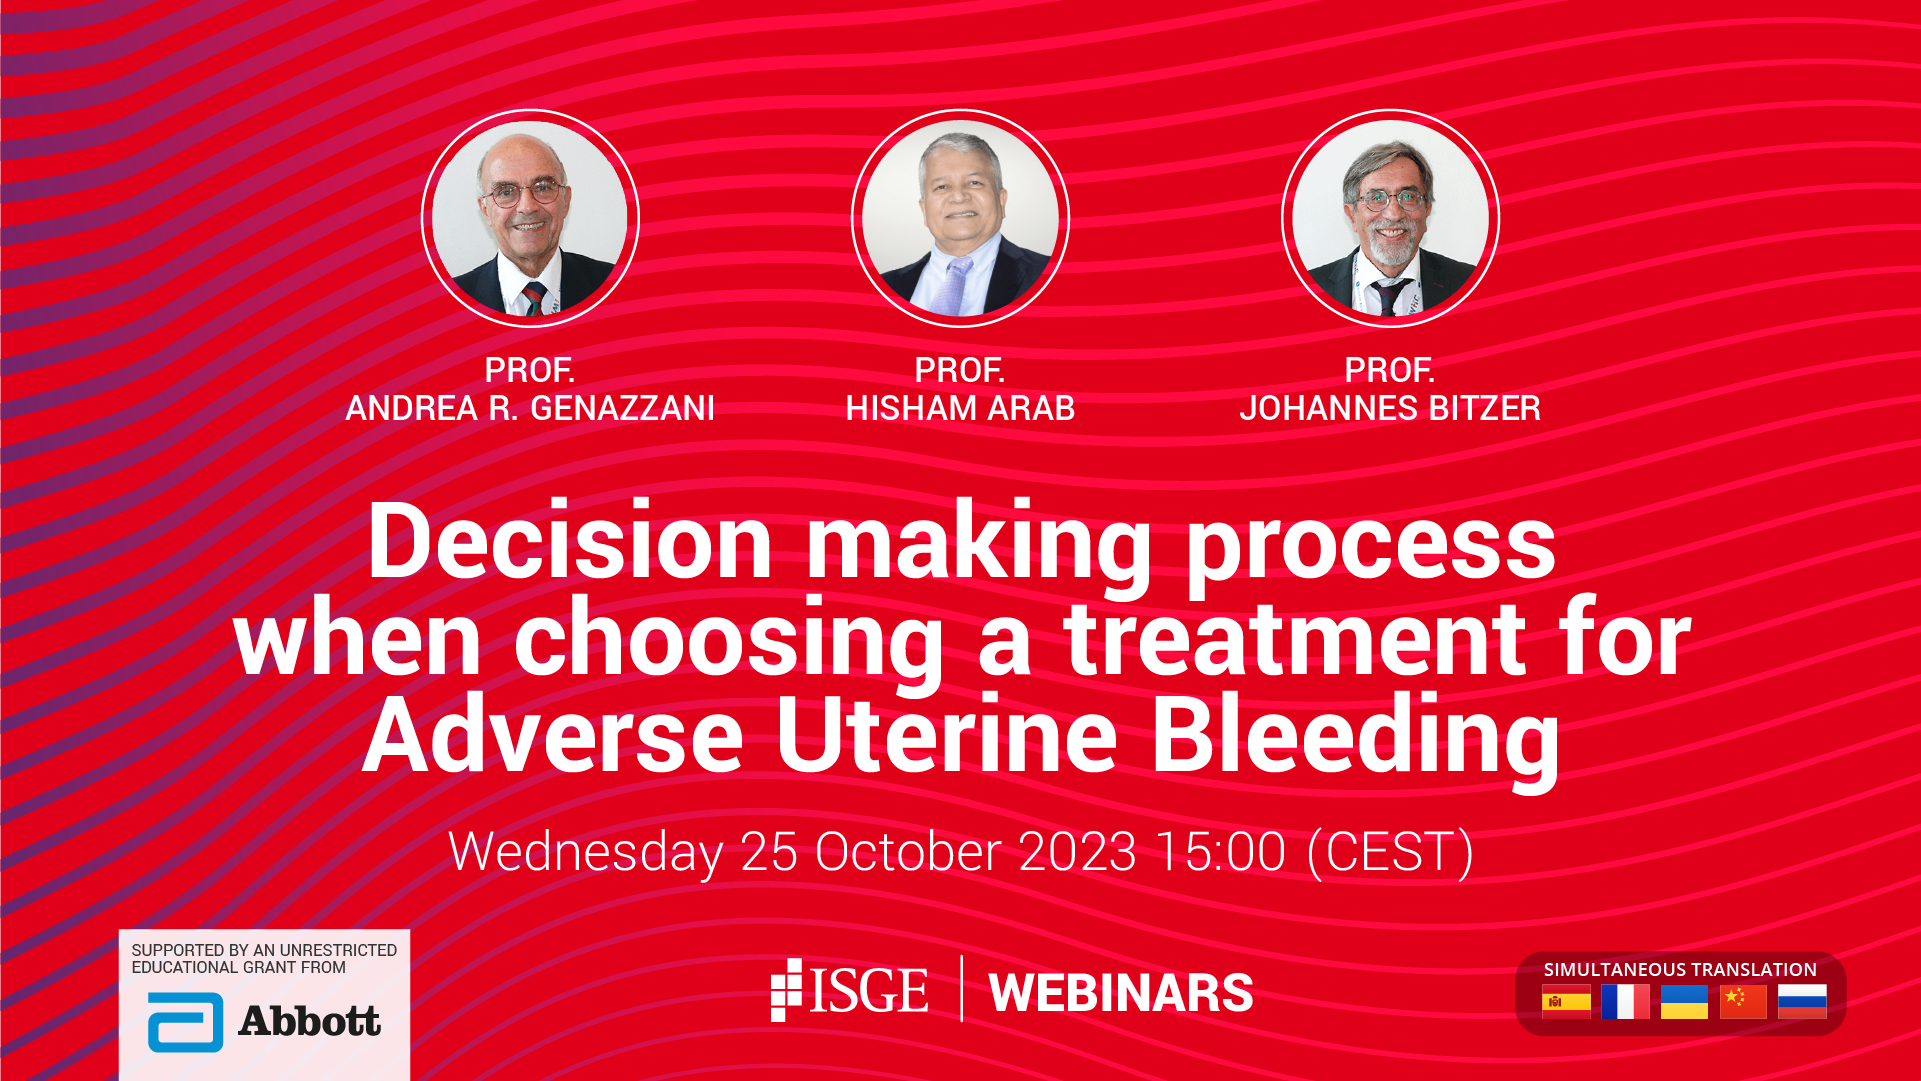 Decision making process when choosing a treatment for Adverse Uterine Bleeding